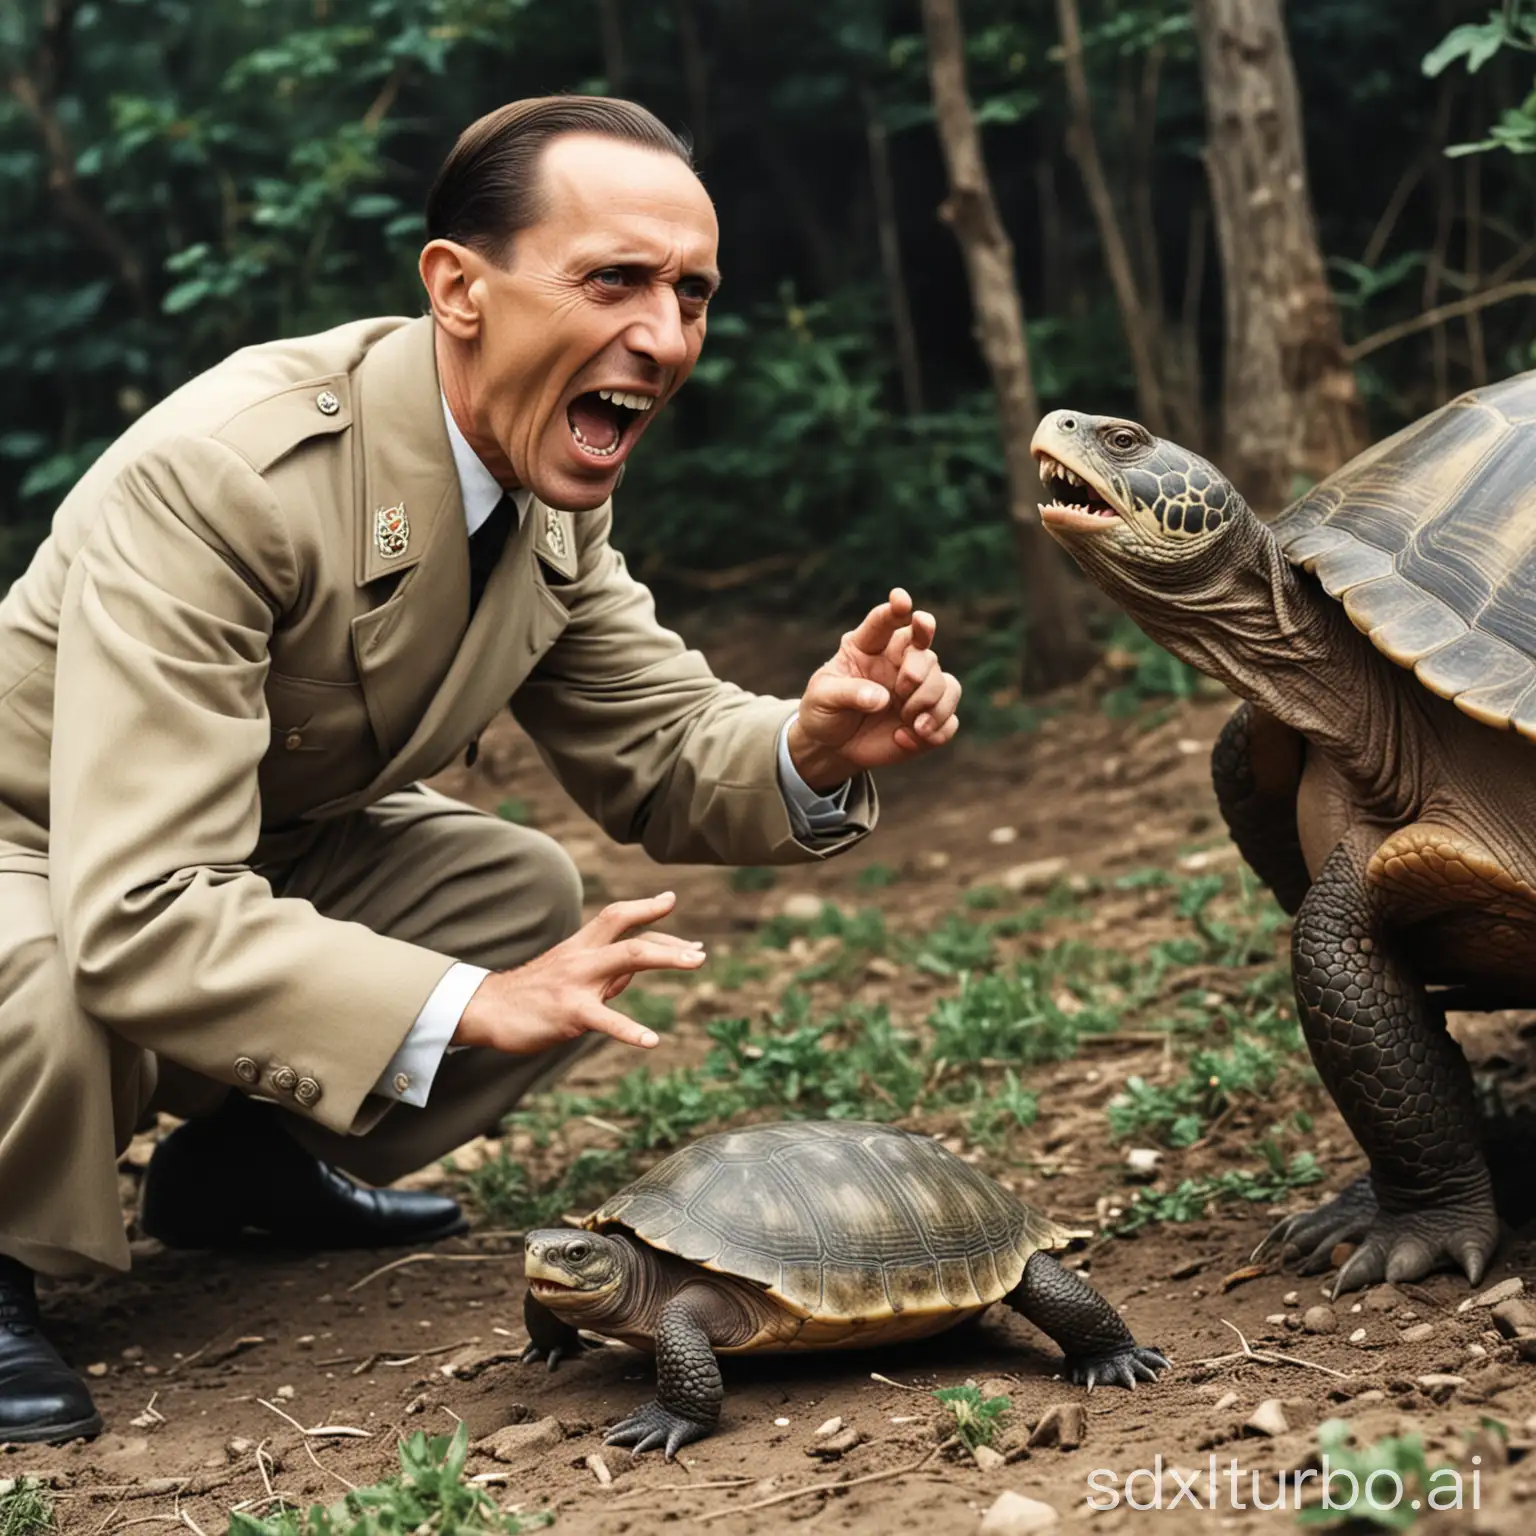 Historic-Moment-Captured-Joseph-Goebbels-Screaming-from-a-Turtle-Bite-in-an-Old-Color-Photo